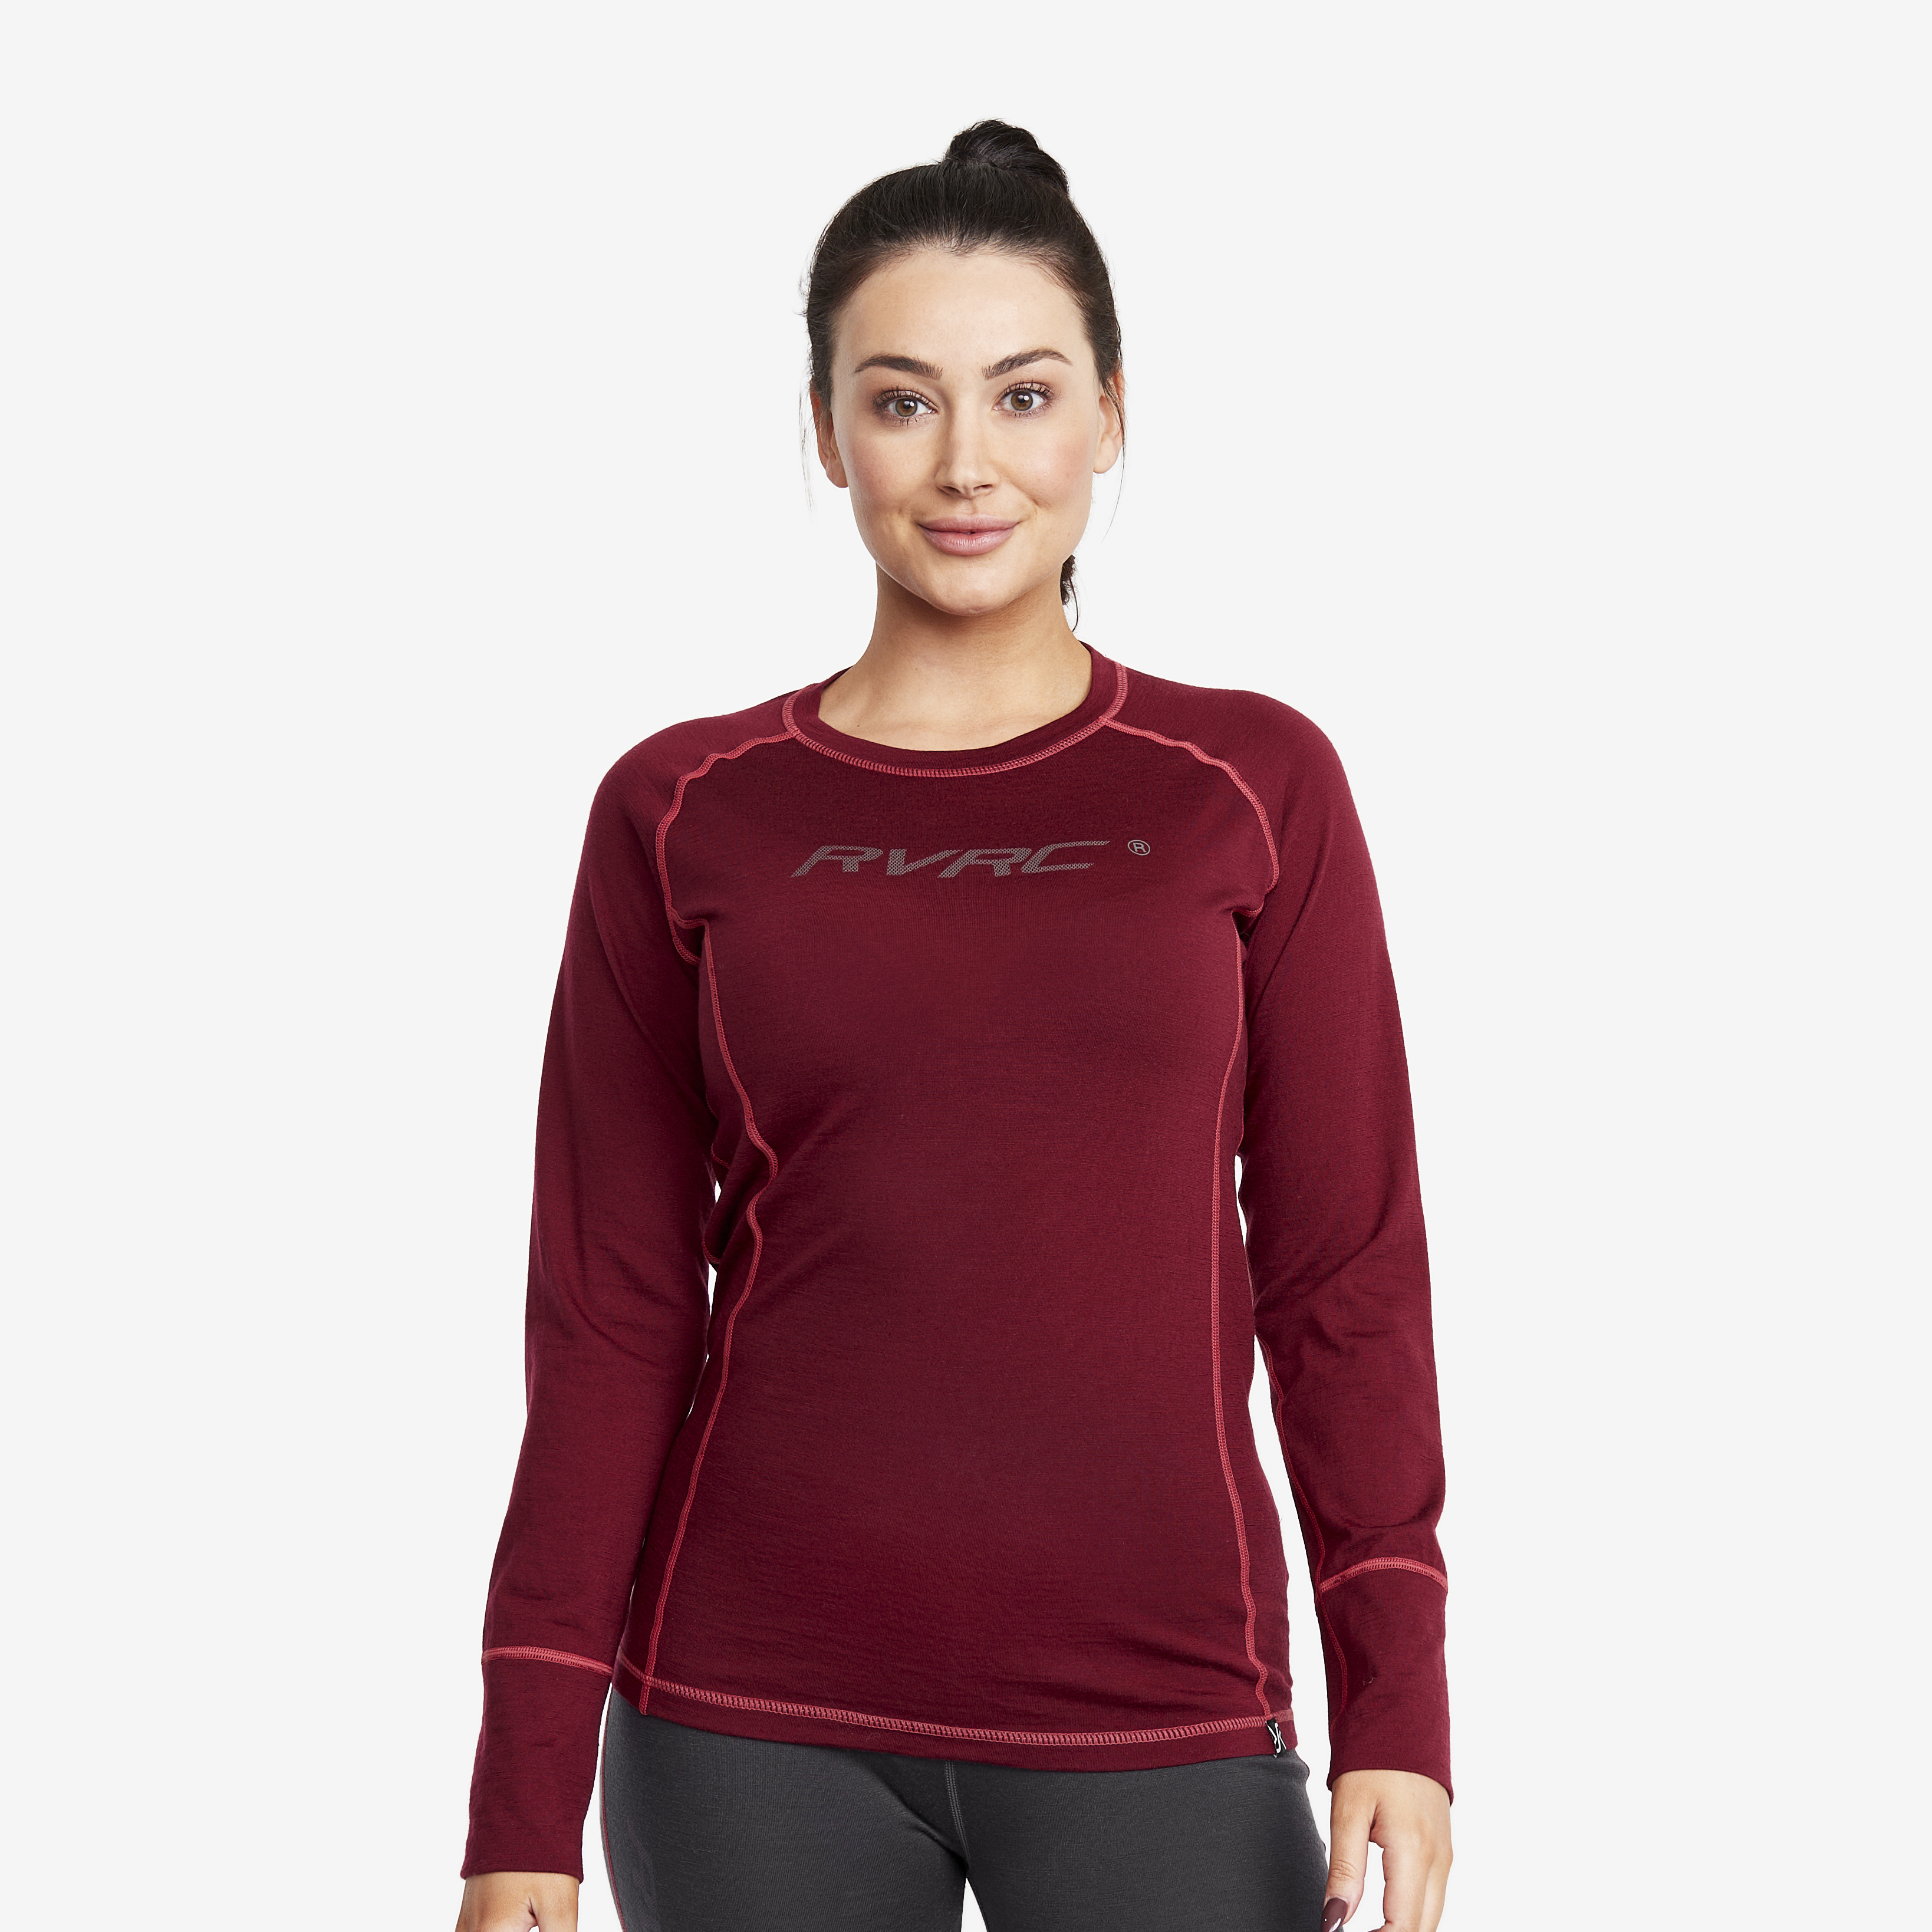 Outright Merino Top Bison Red/ Anthracite Dame